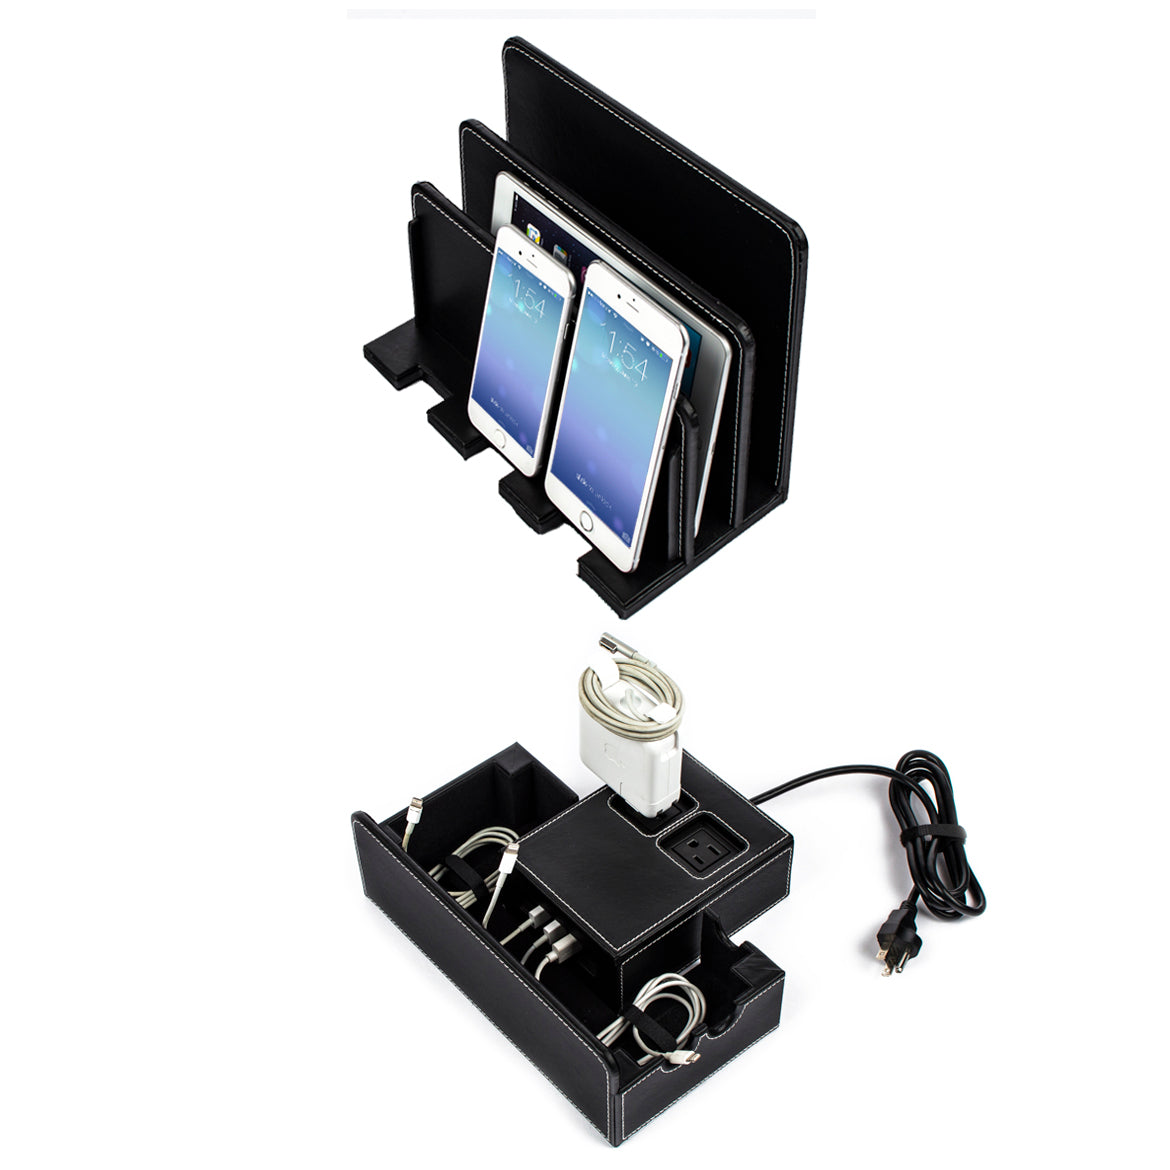 Organize-It-All Multi-Device Charging Station Review: Solid Management